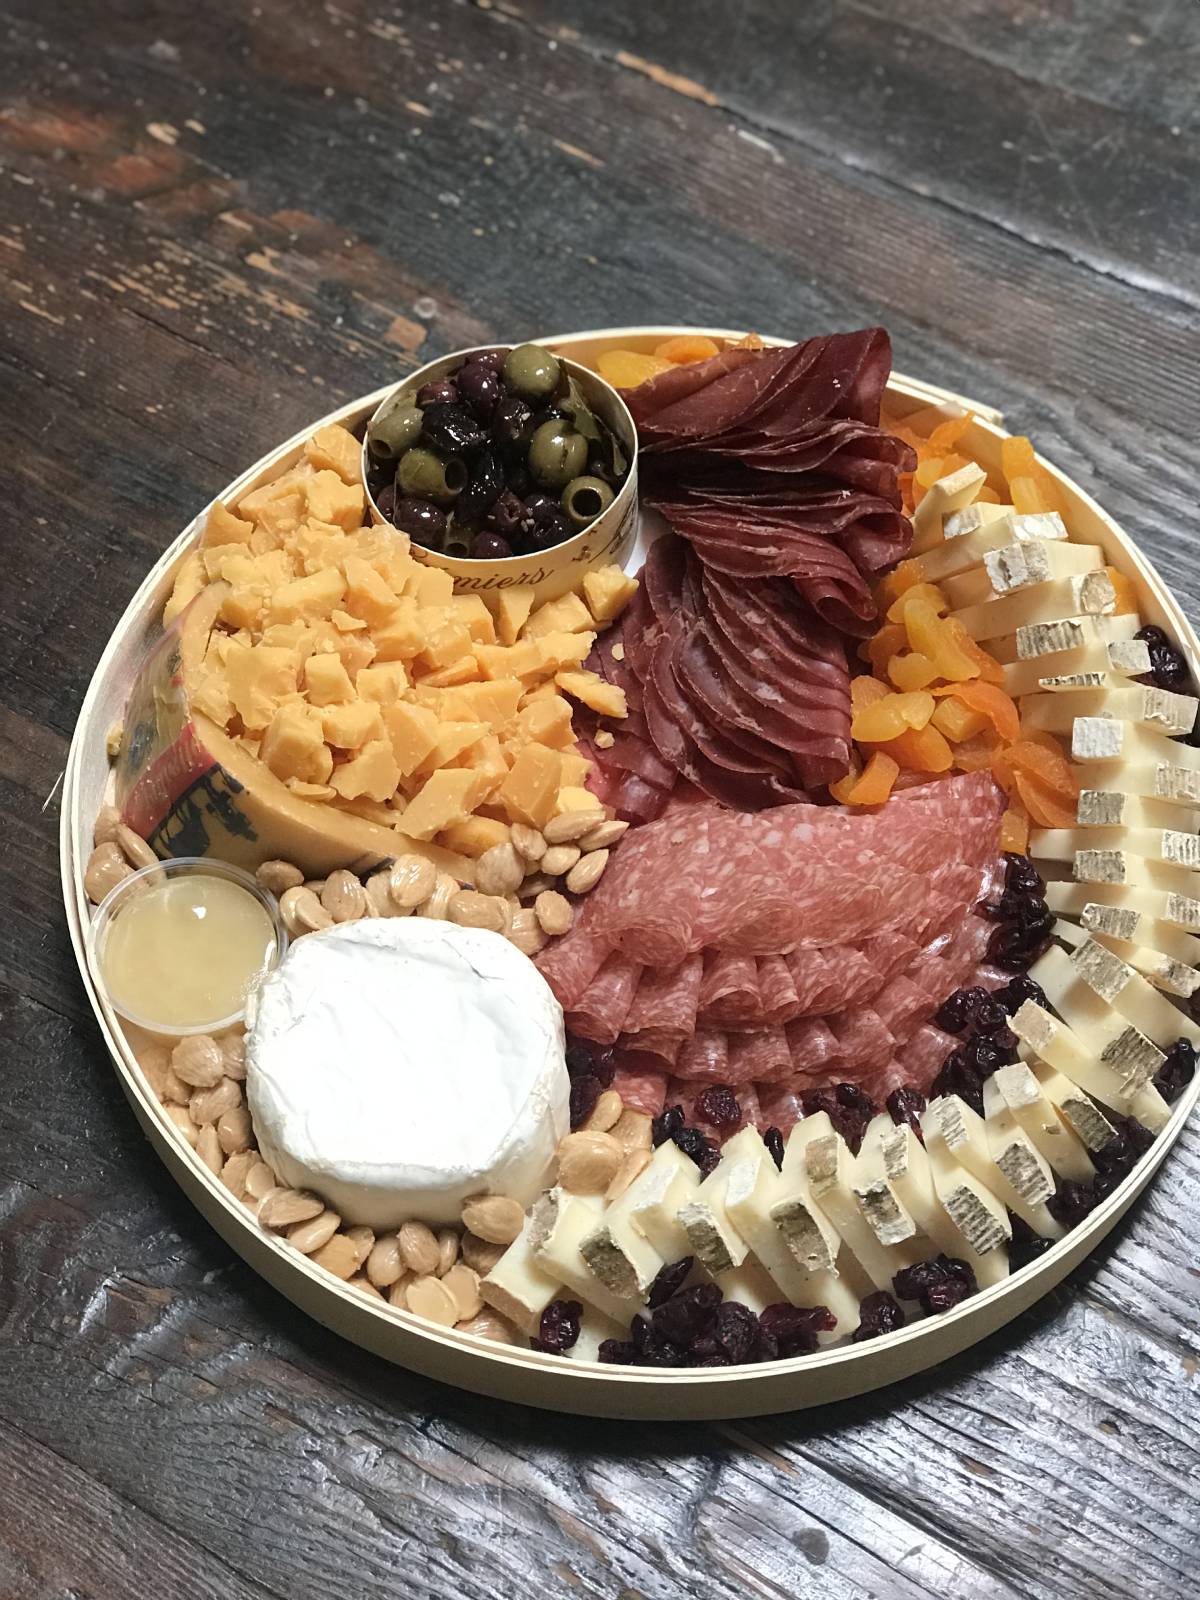 This At-Home Picnic Will Have You Cheesin’